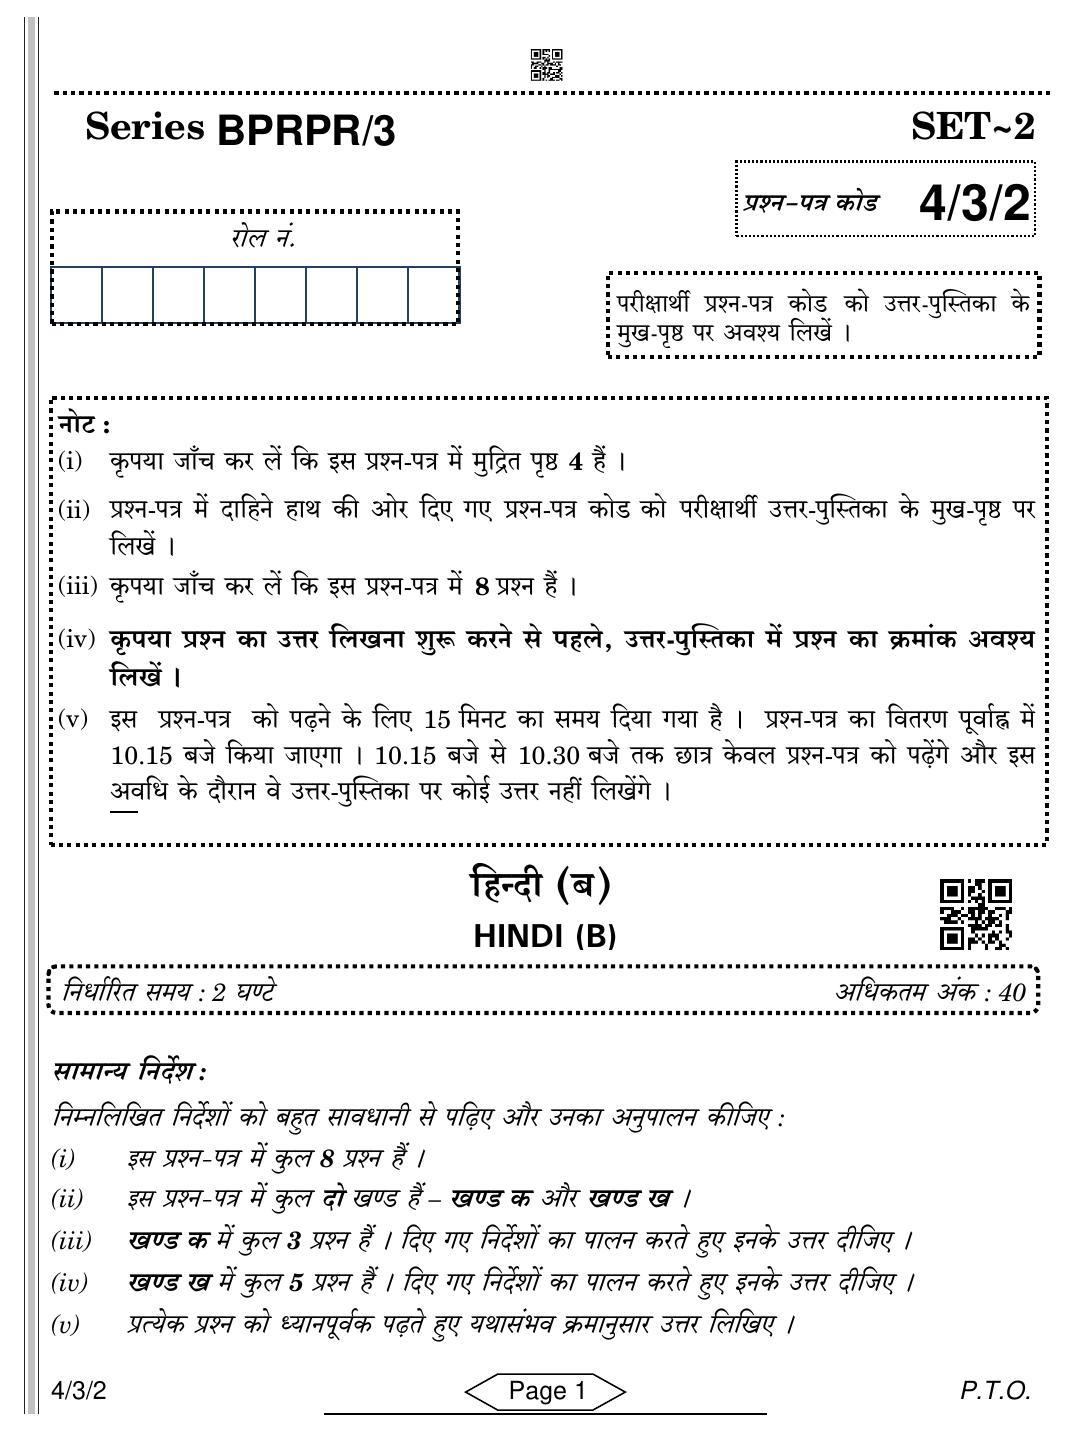 CBSE Class 10 4-3-2 Hindi B 2022 Question Paper - Page 1